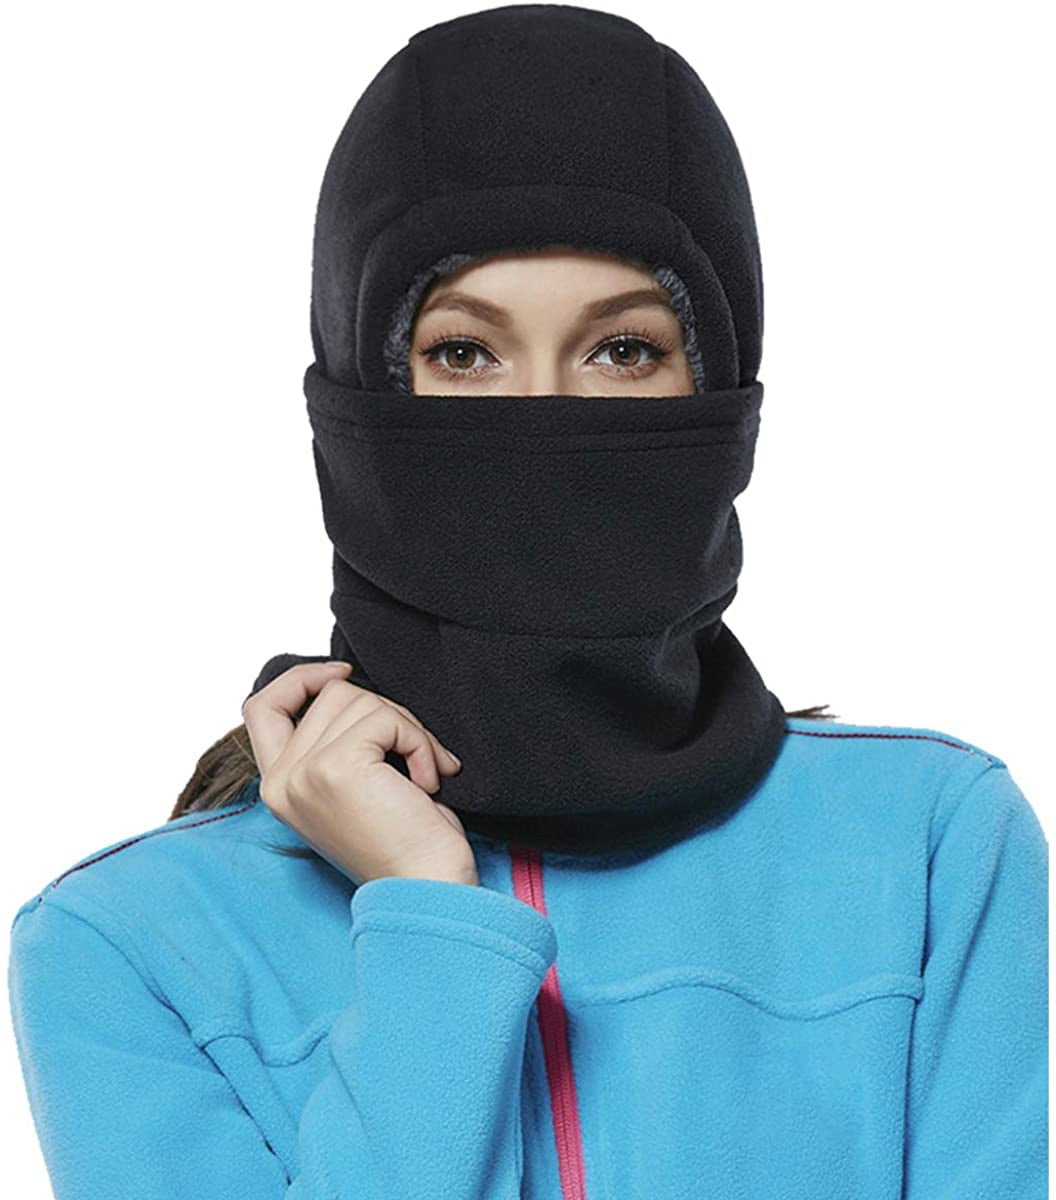 Winter Thermal Balaclava Windproof Face Mask Tube Scarf Neck Gaiter Ski Outdoor 